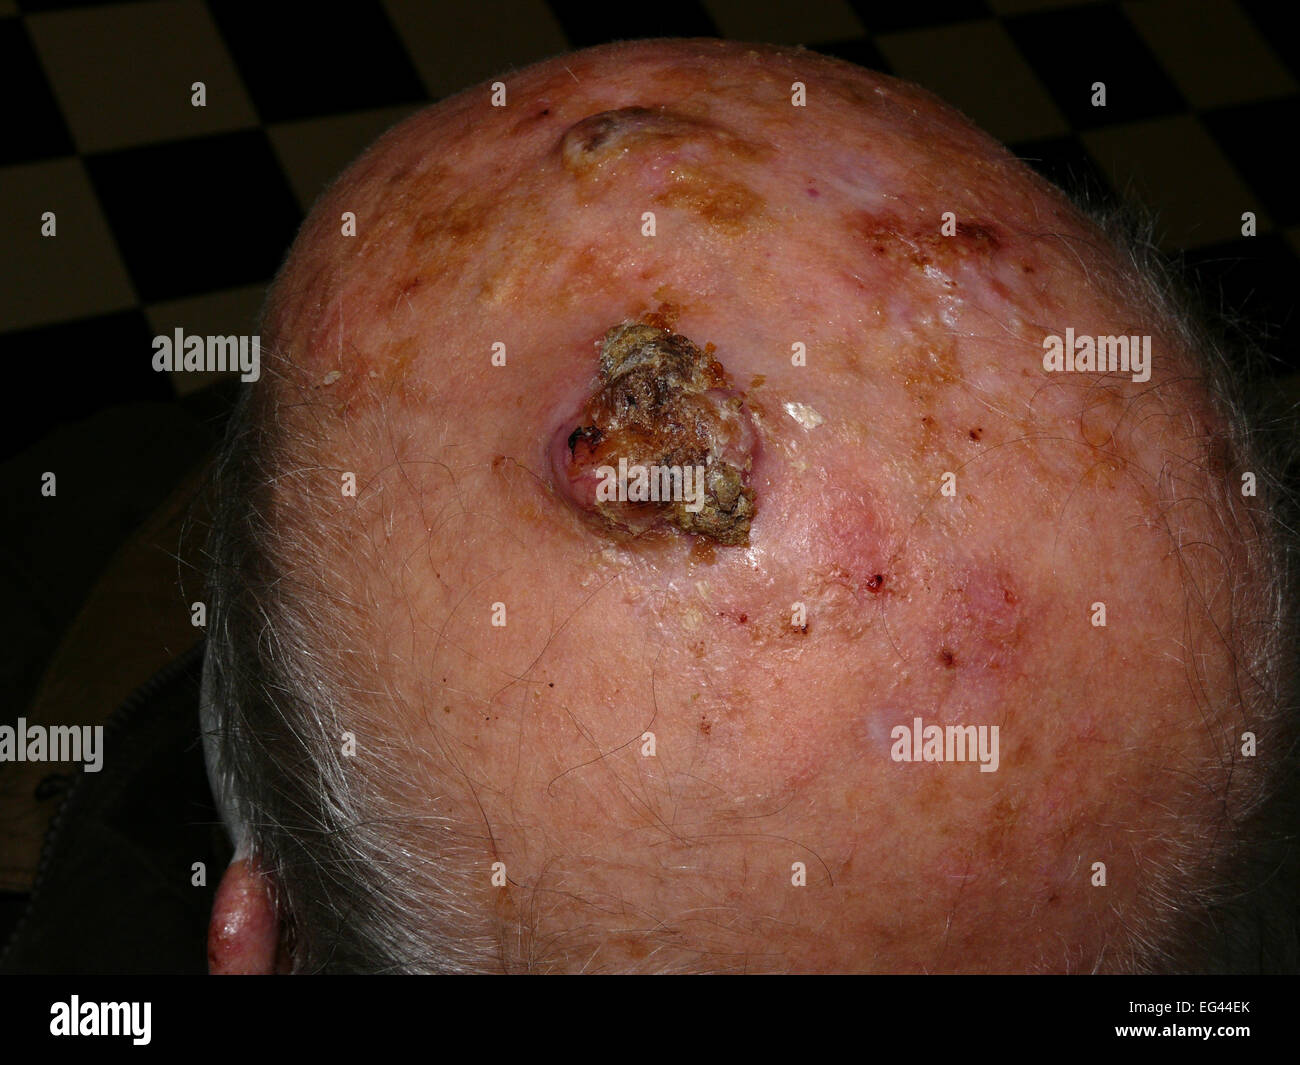 Warning Signs and Images - SkinCancer.org